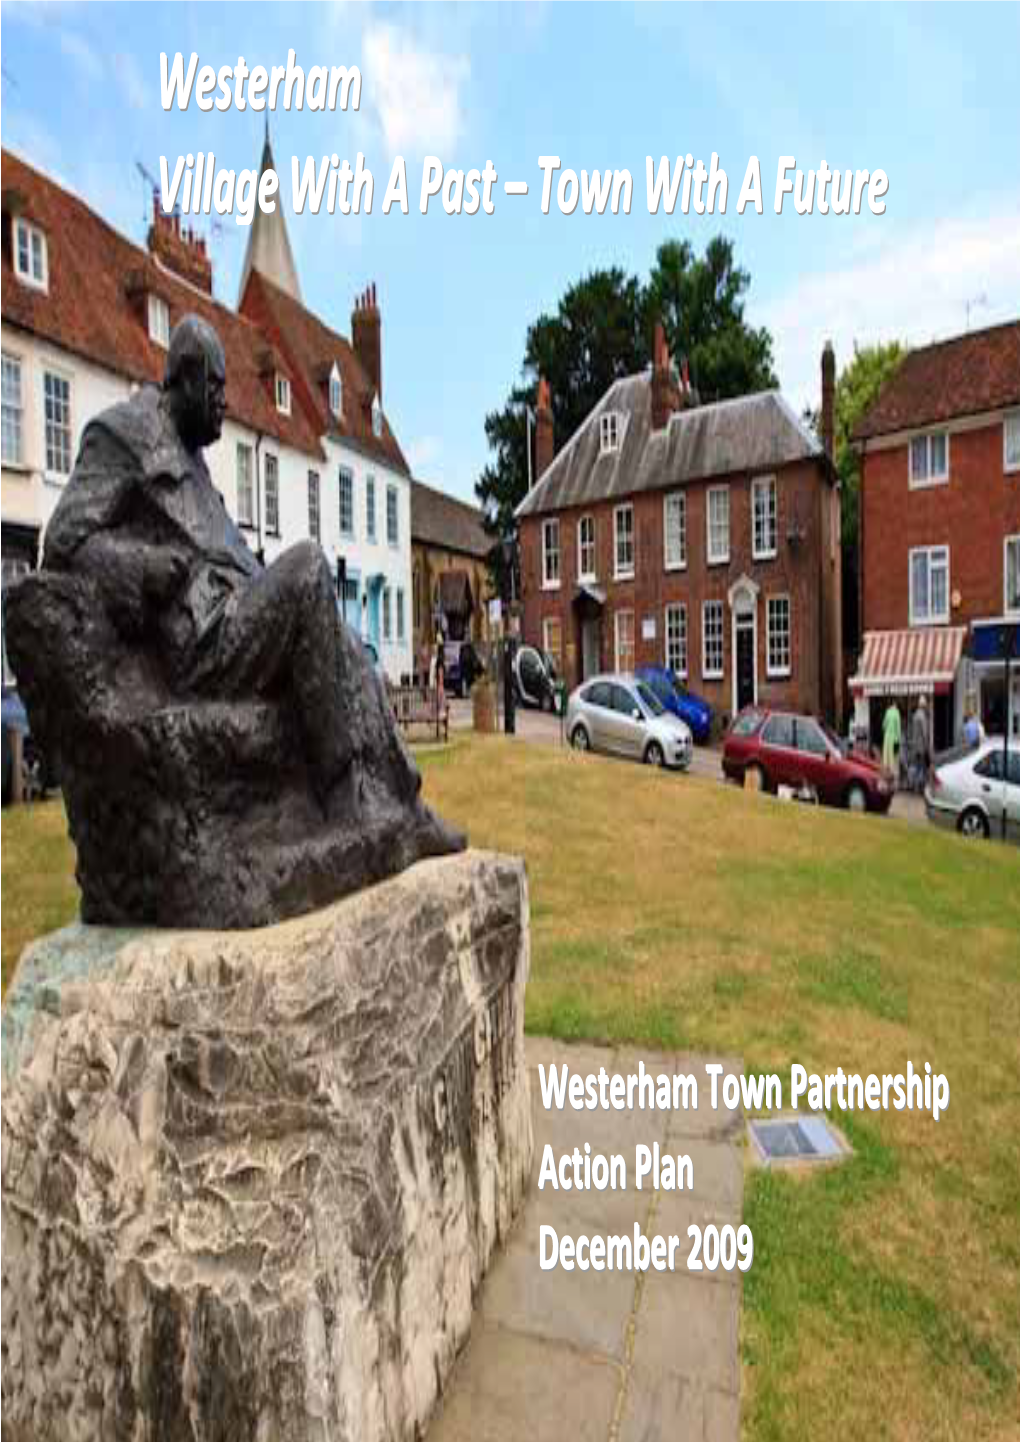 Westerham Village with a Past – Town with a Future